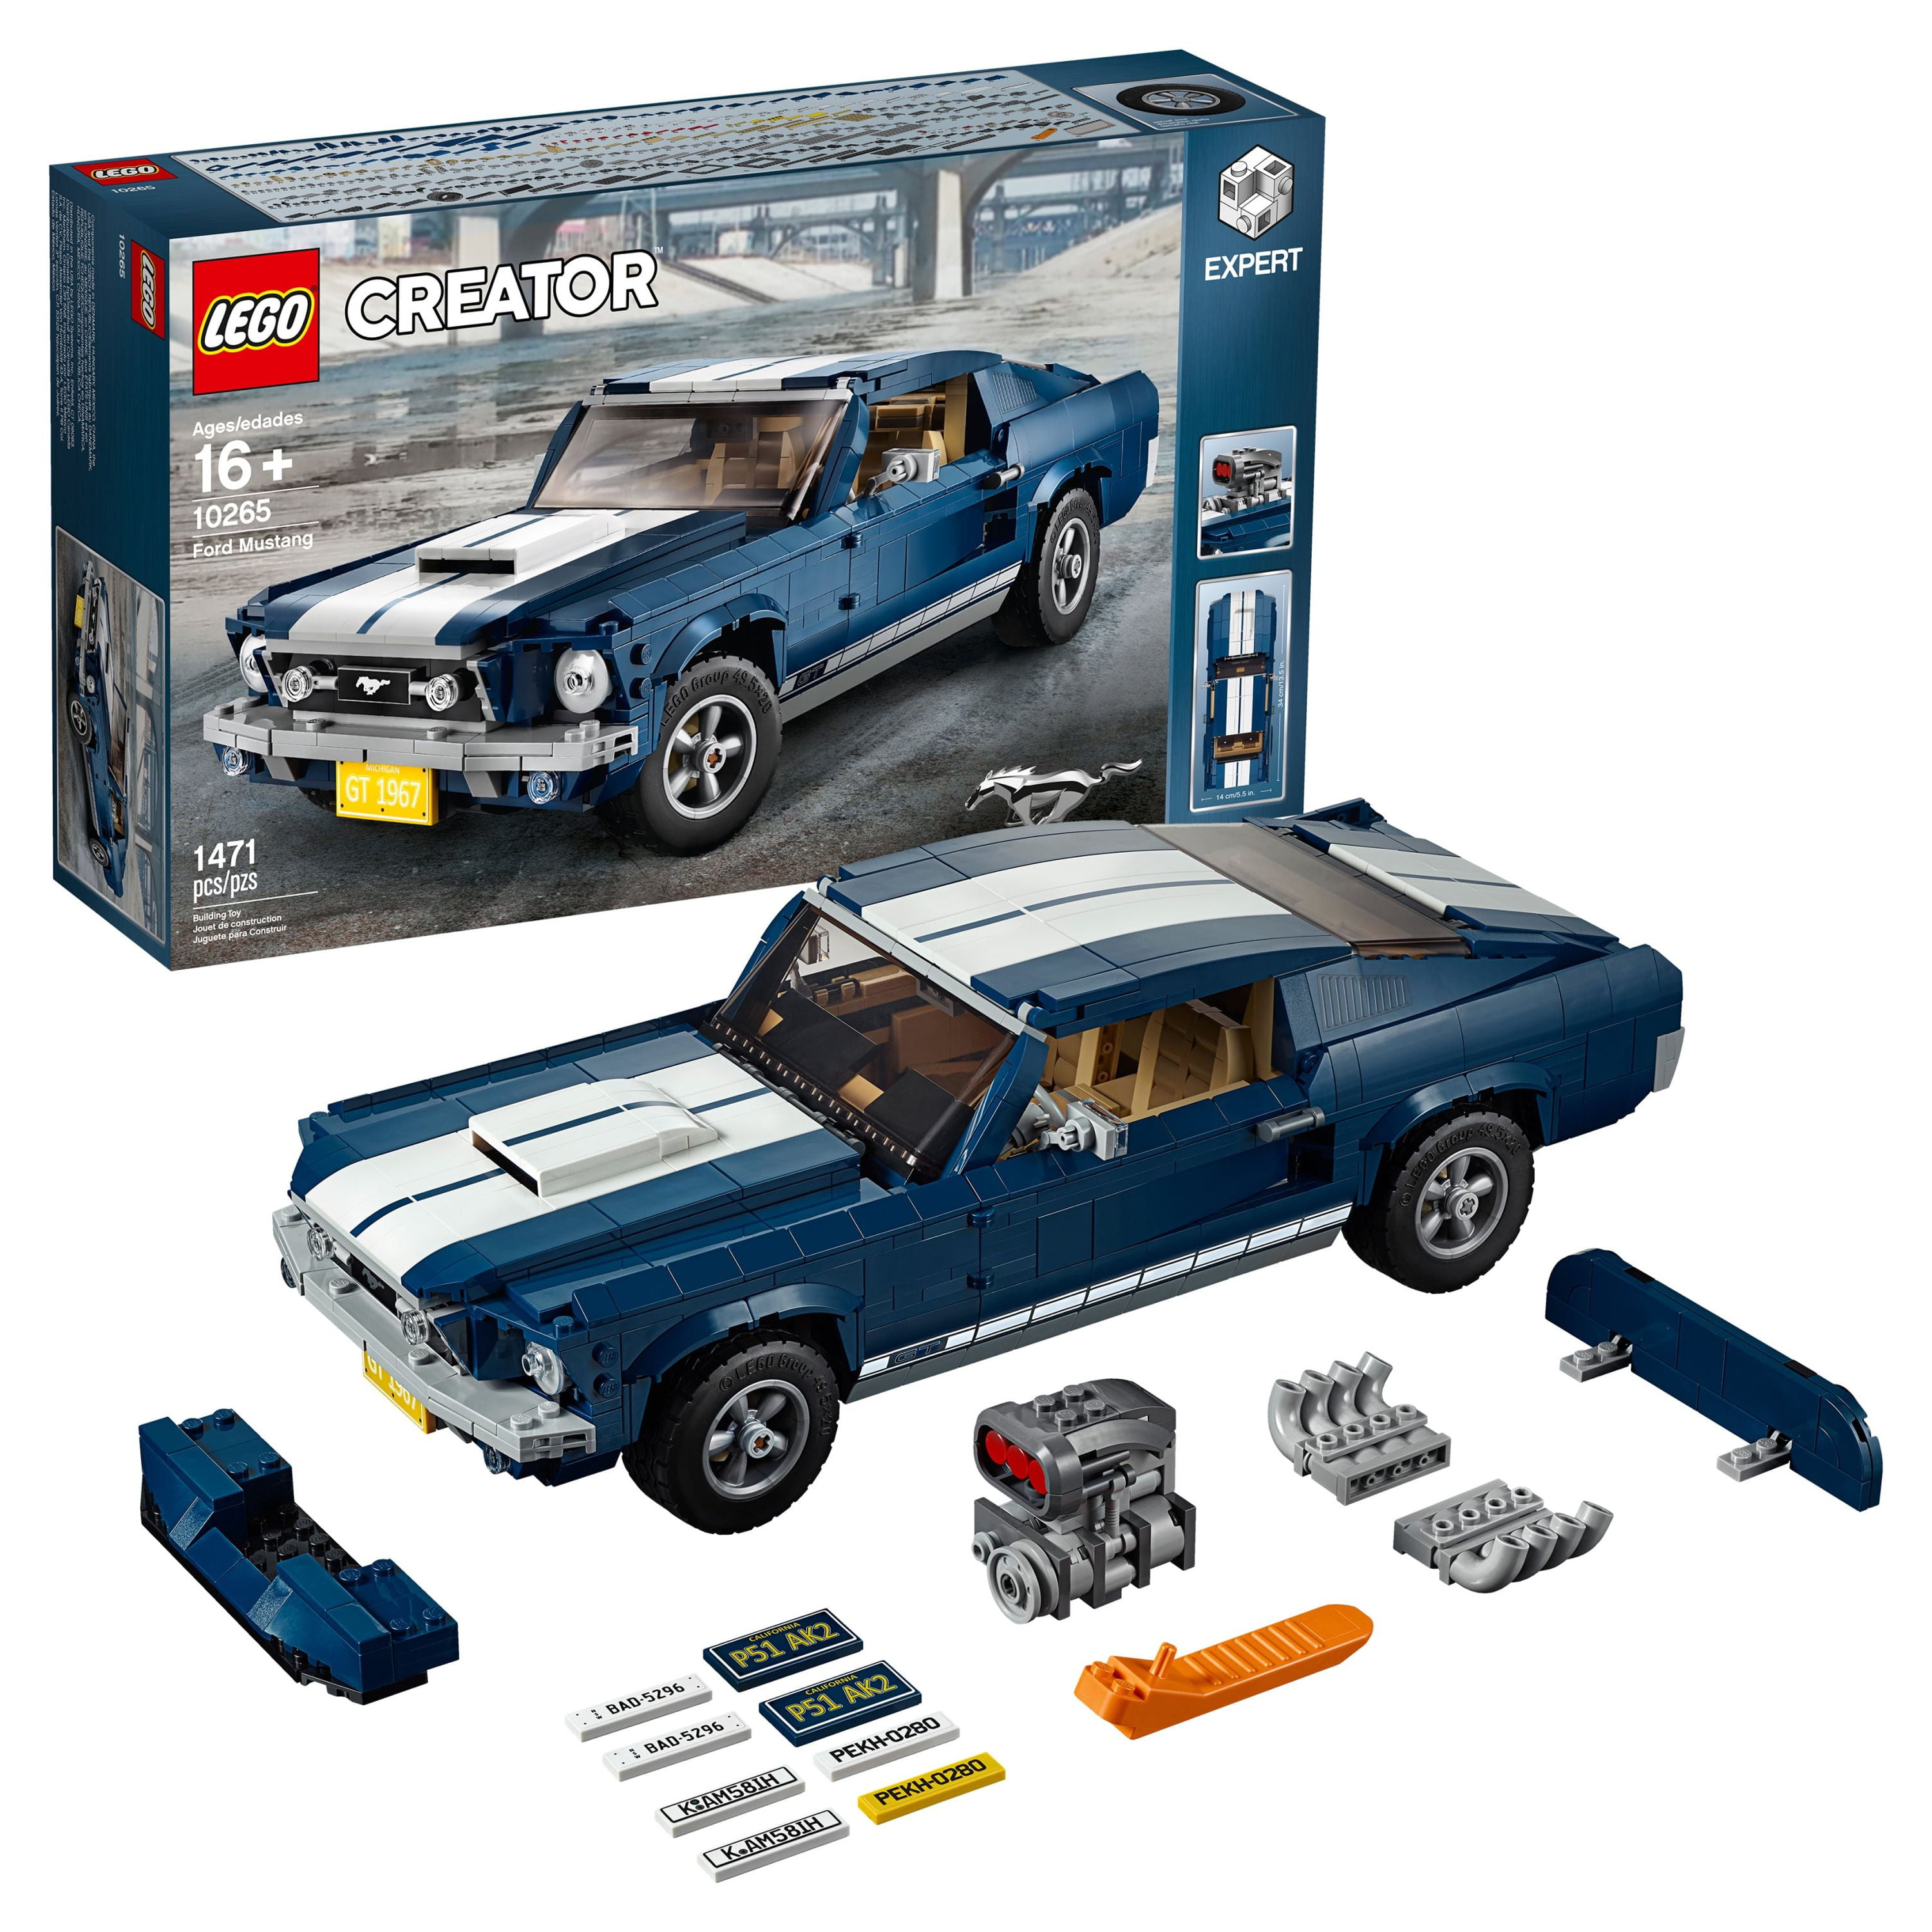 LEGO Creator Expert Ford Mustang 10265 Building Set - Exclusive Advanced  Collector's Car Model, Featuring Detailed Interior, V8 Engine, Home and